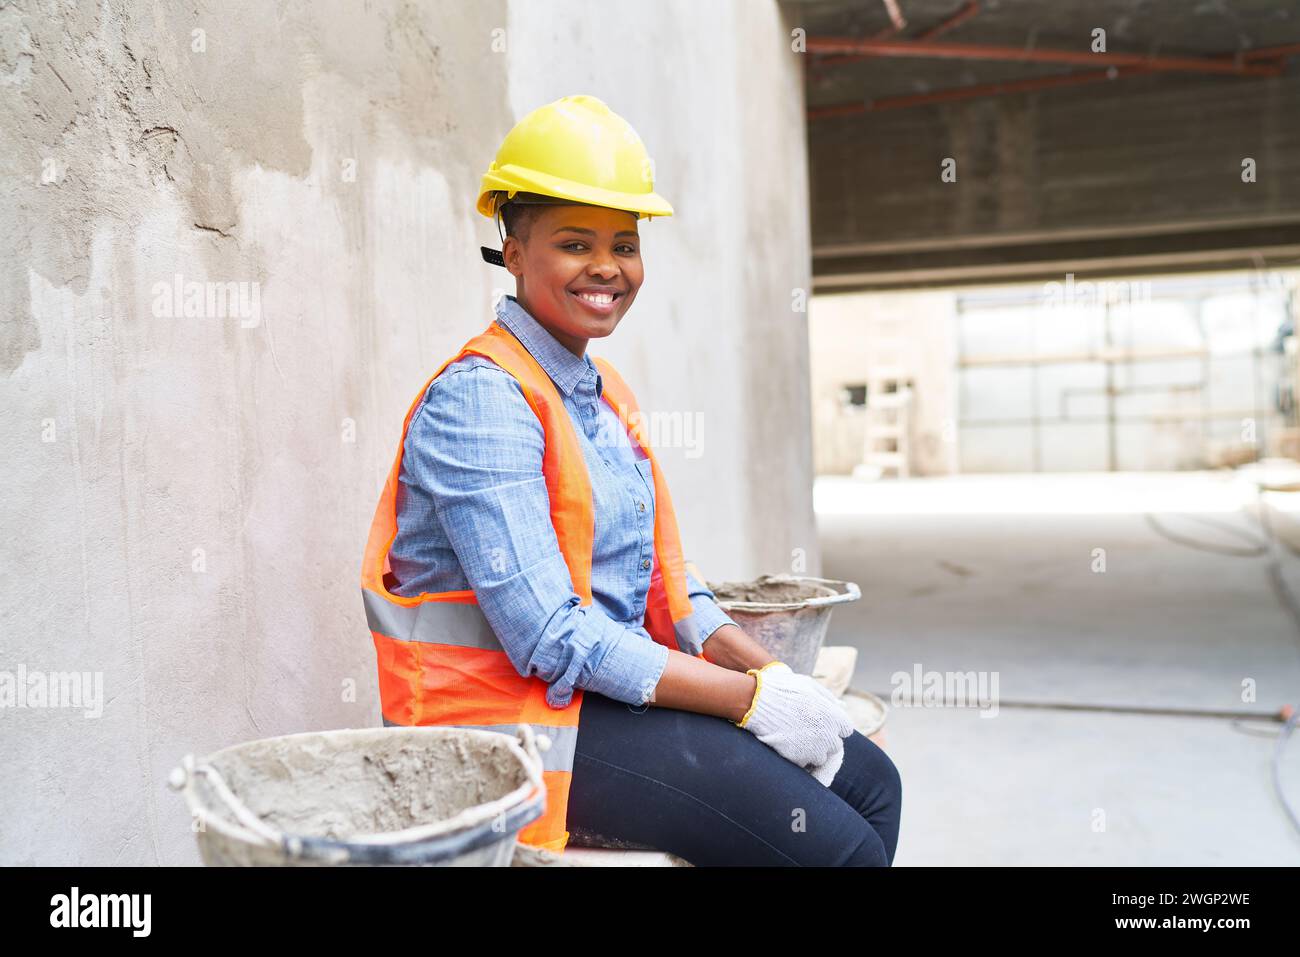 Smiling female bricklayer amidst buckets Stock Photo